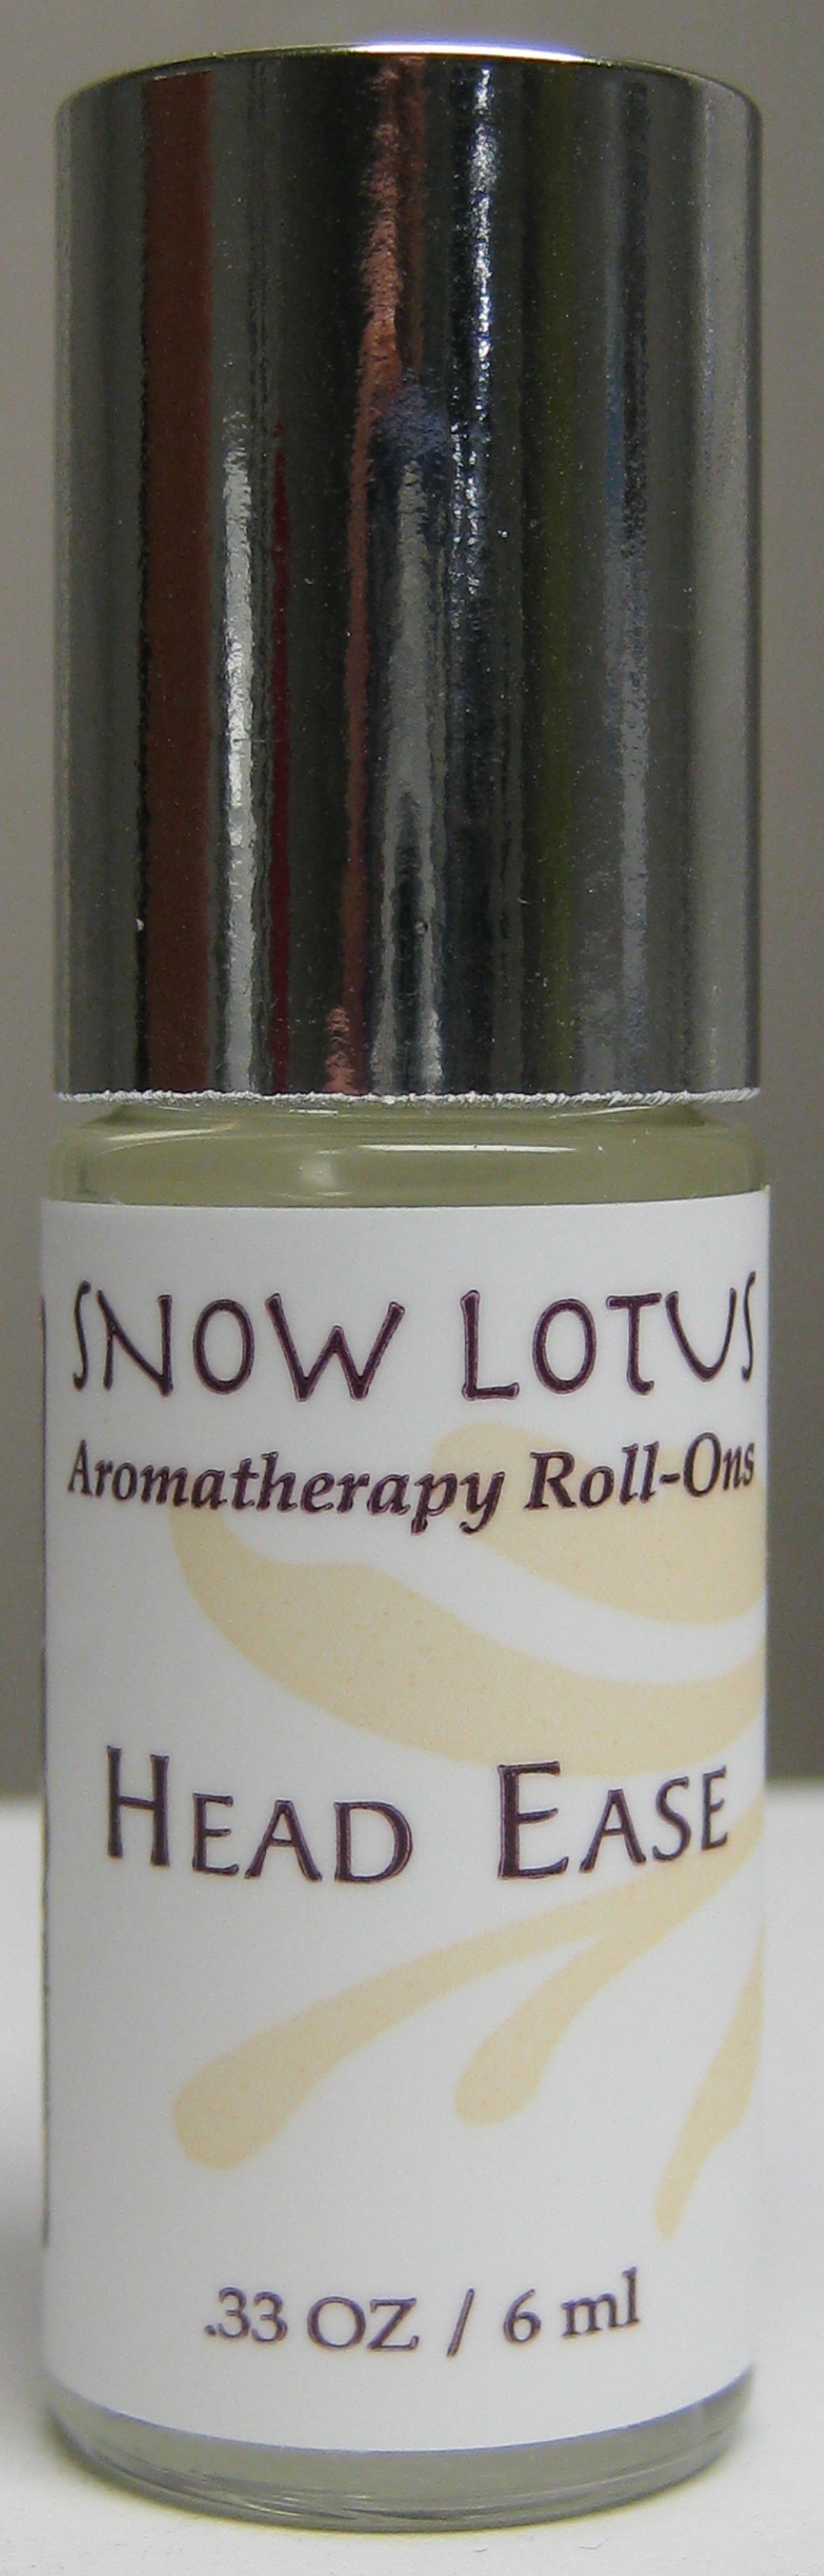 Head Ease Aromatherapy Roll-On